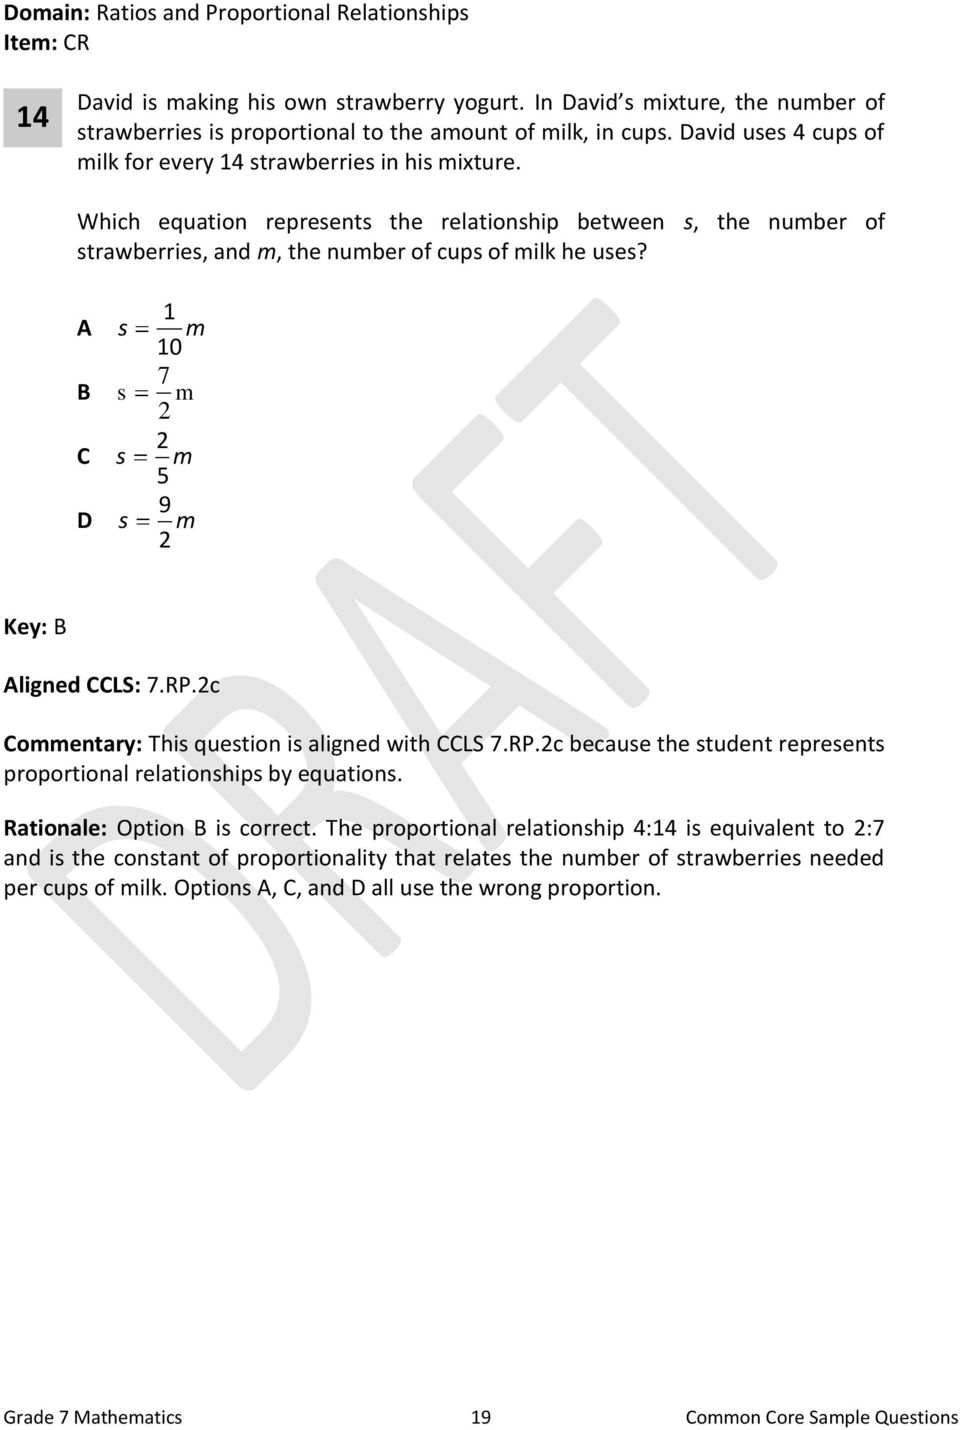 A B C D s s s s 1 m 10 7 m 2 2 m 5 9 m 2 Key: B Aligned CCLS: 7.RP.2c Commentary: This question is aligned with CCLS 7.RP.2c because the student represents proportional relationships by equations.